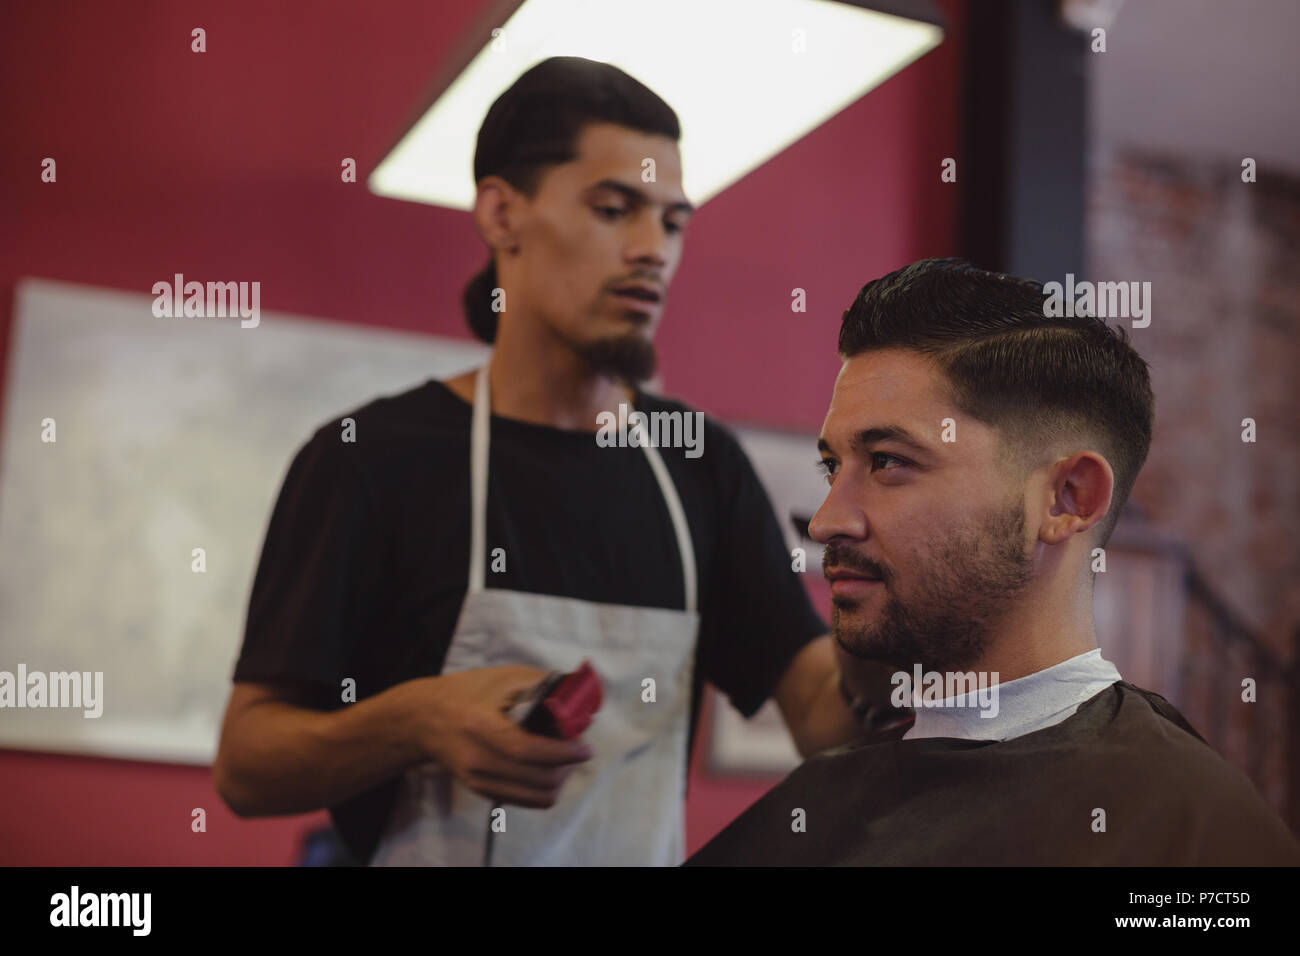 Man getting his hair trimmed with trimmer Stock Photo